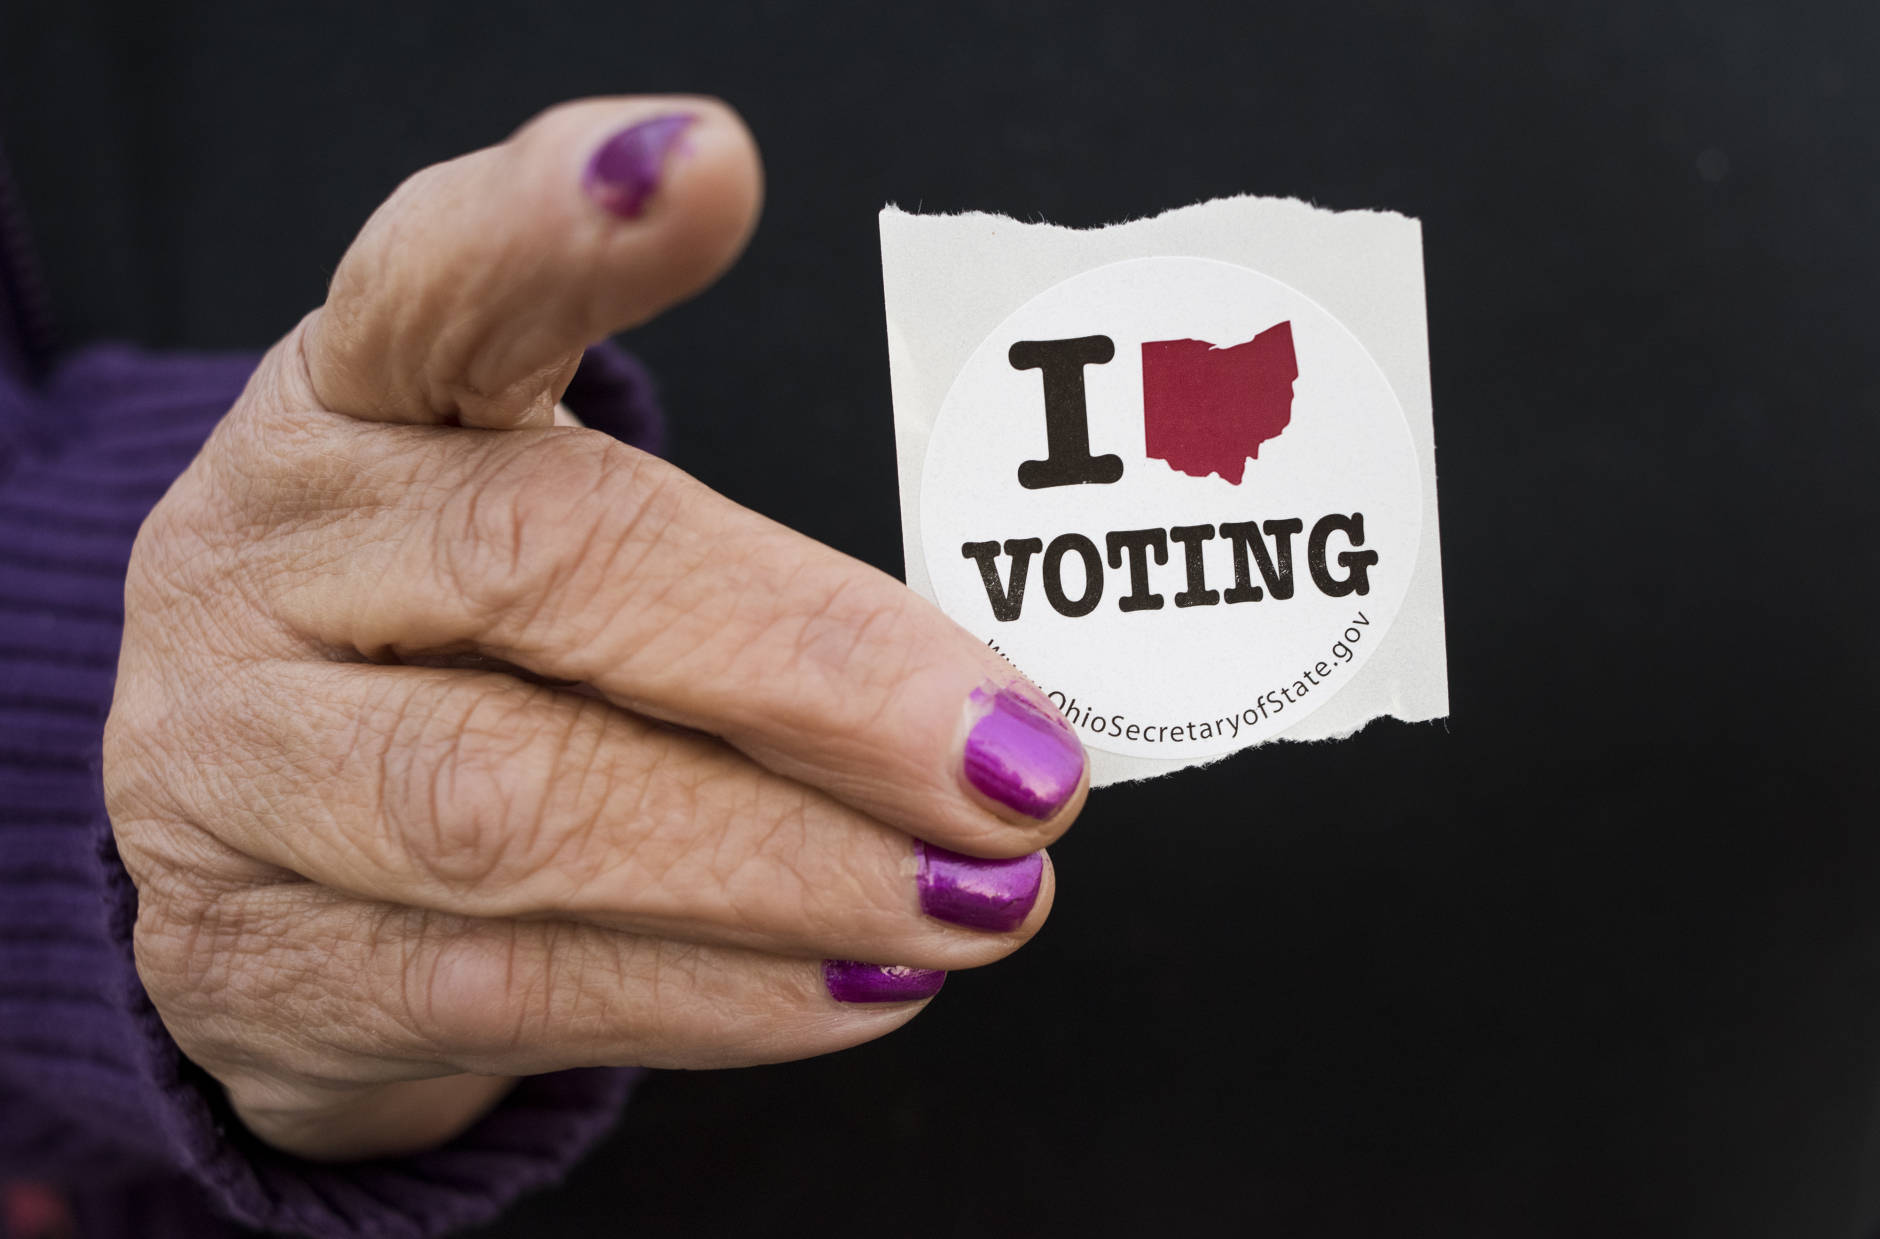 BUTLER TWP, OH - NOVEMBER 08: A woman holds her voting sticker in her hand after casting her ballot at the Leetonia American Legion Post 131 obn November 8, 2016 in Leetonia, Ohio. . This year, roughly 200 million Americans have registered to vote in this years general election between Republican presidential candidate Donald Trump and Democratic presidential candidate Hillary Clinton. (Photo by Ty Wright/Getty Images)